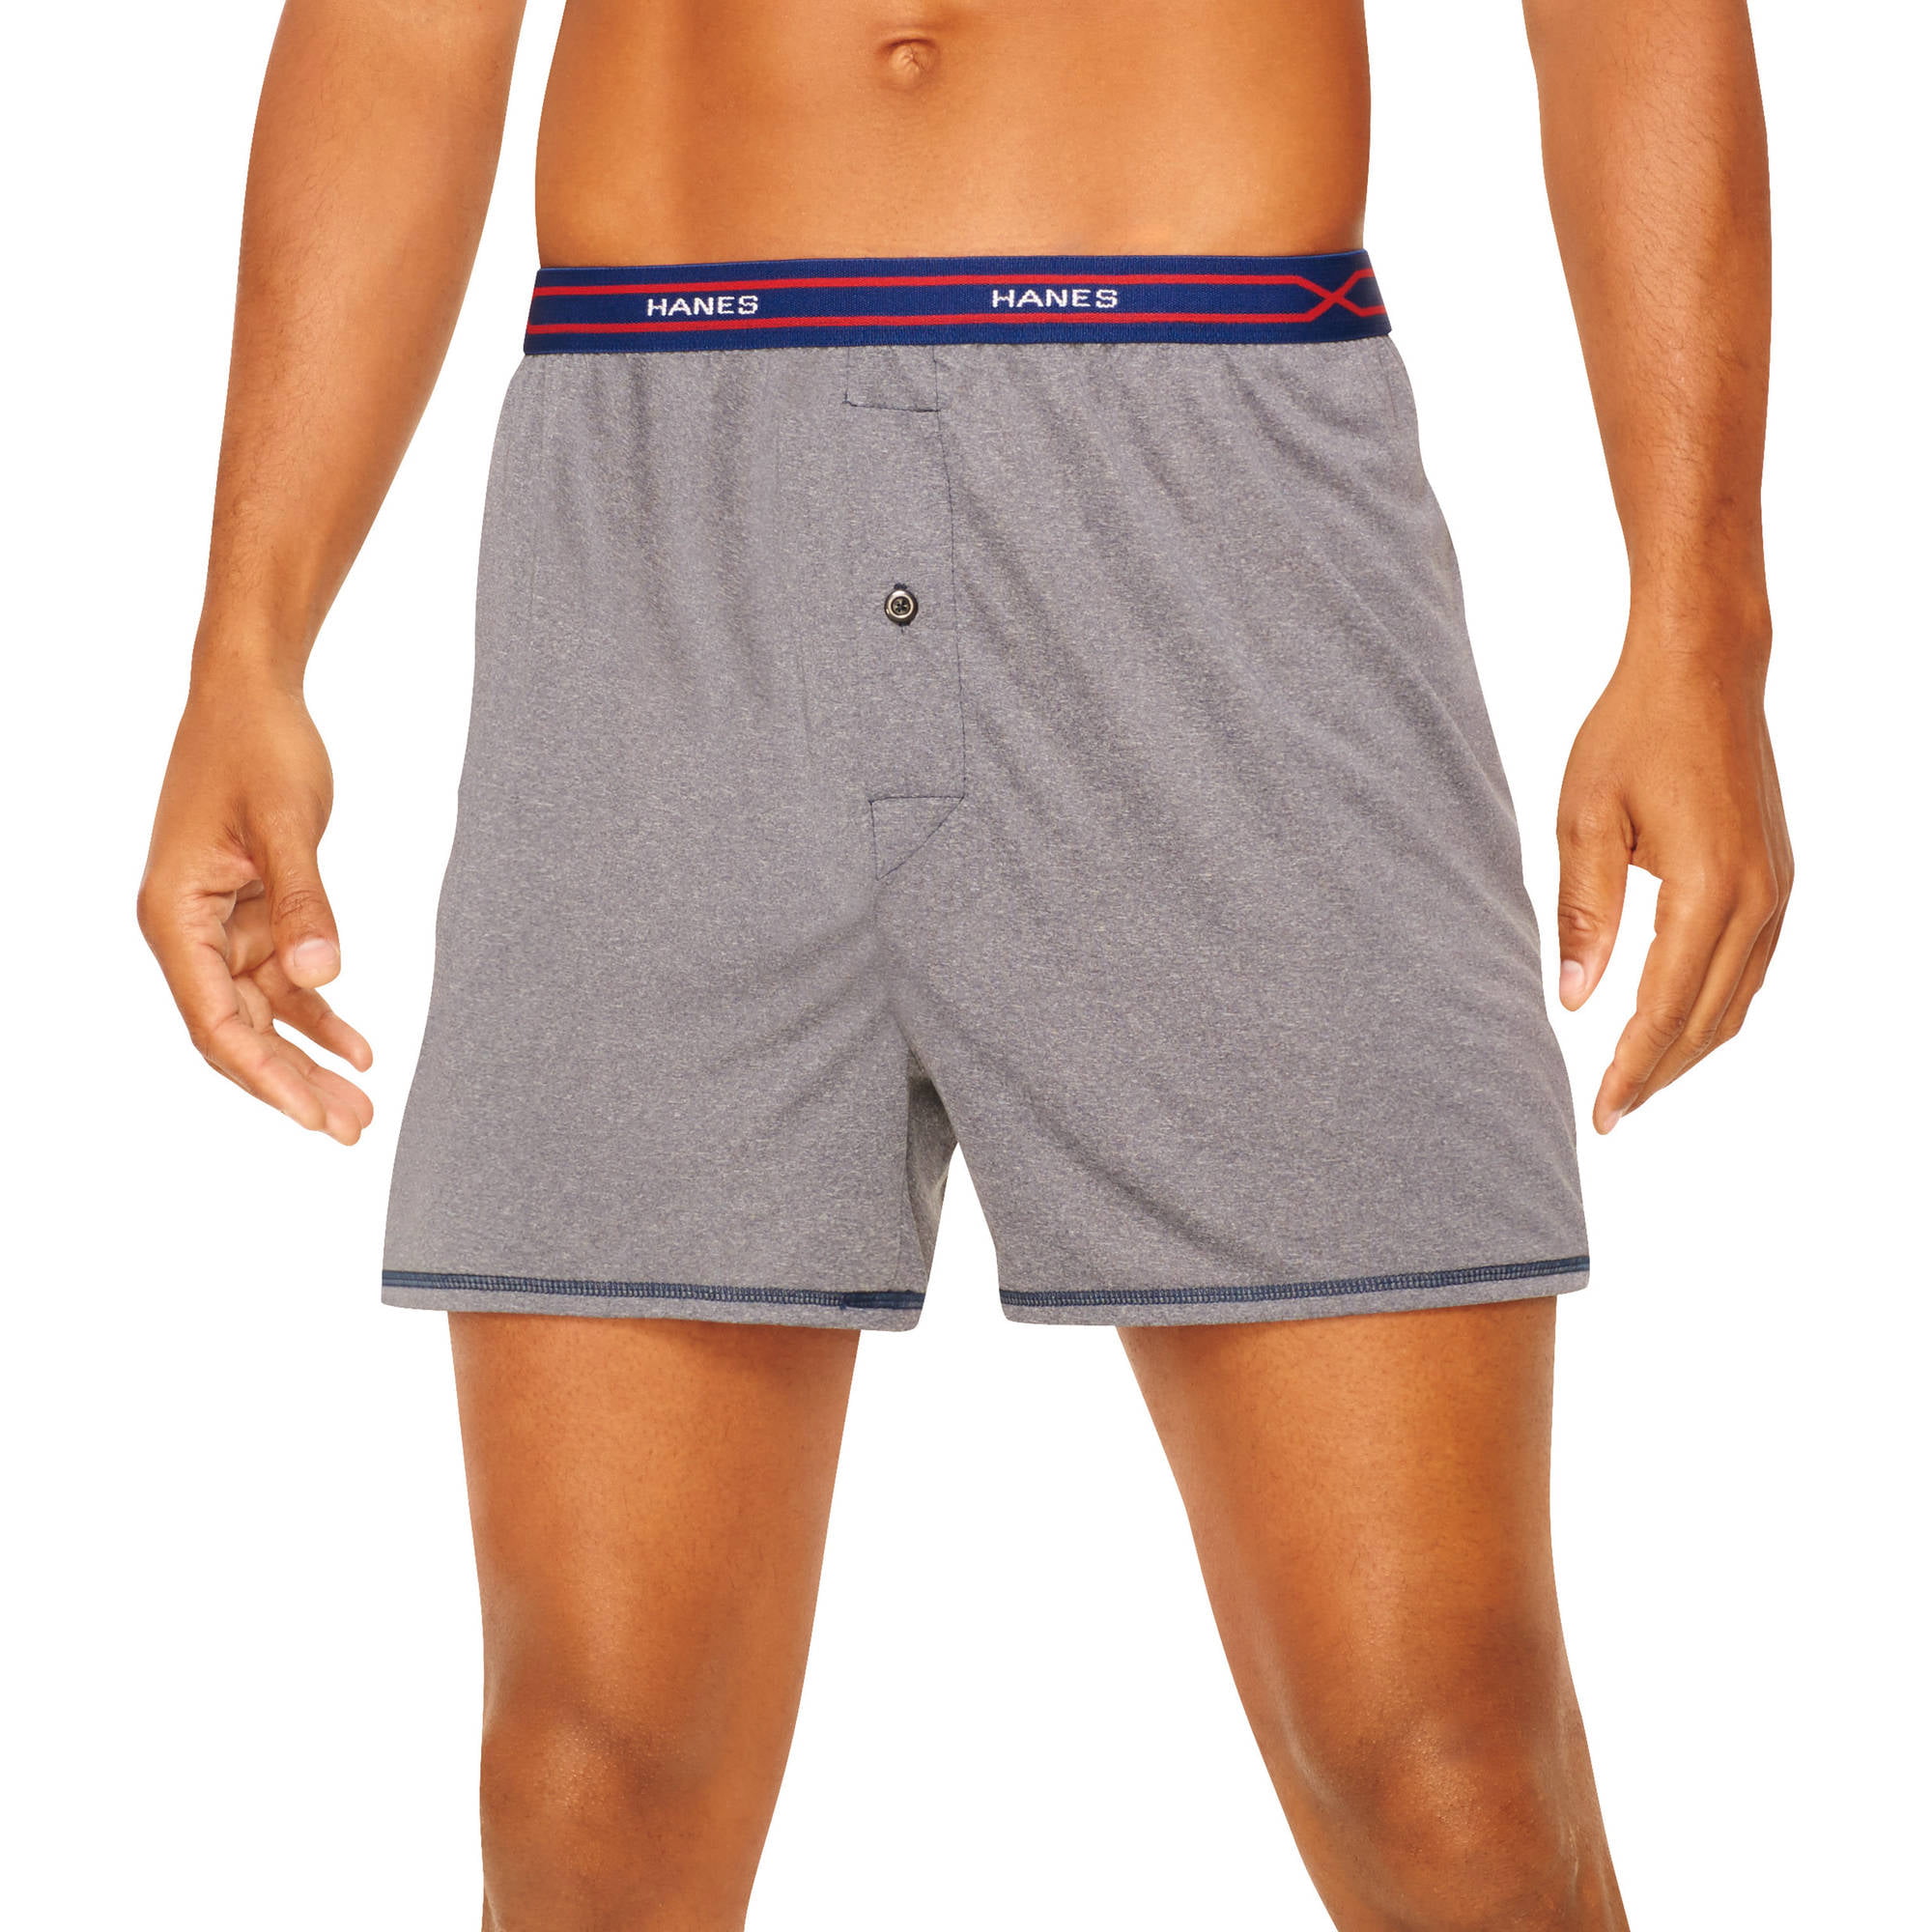 Men's X-Temp Performance Cool Boxers, 3 Pack - Colors May Vary